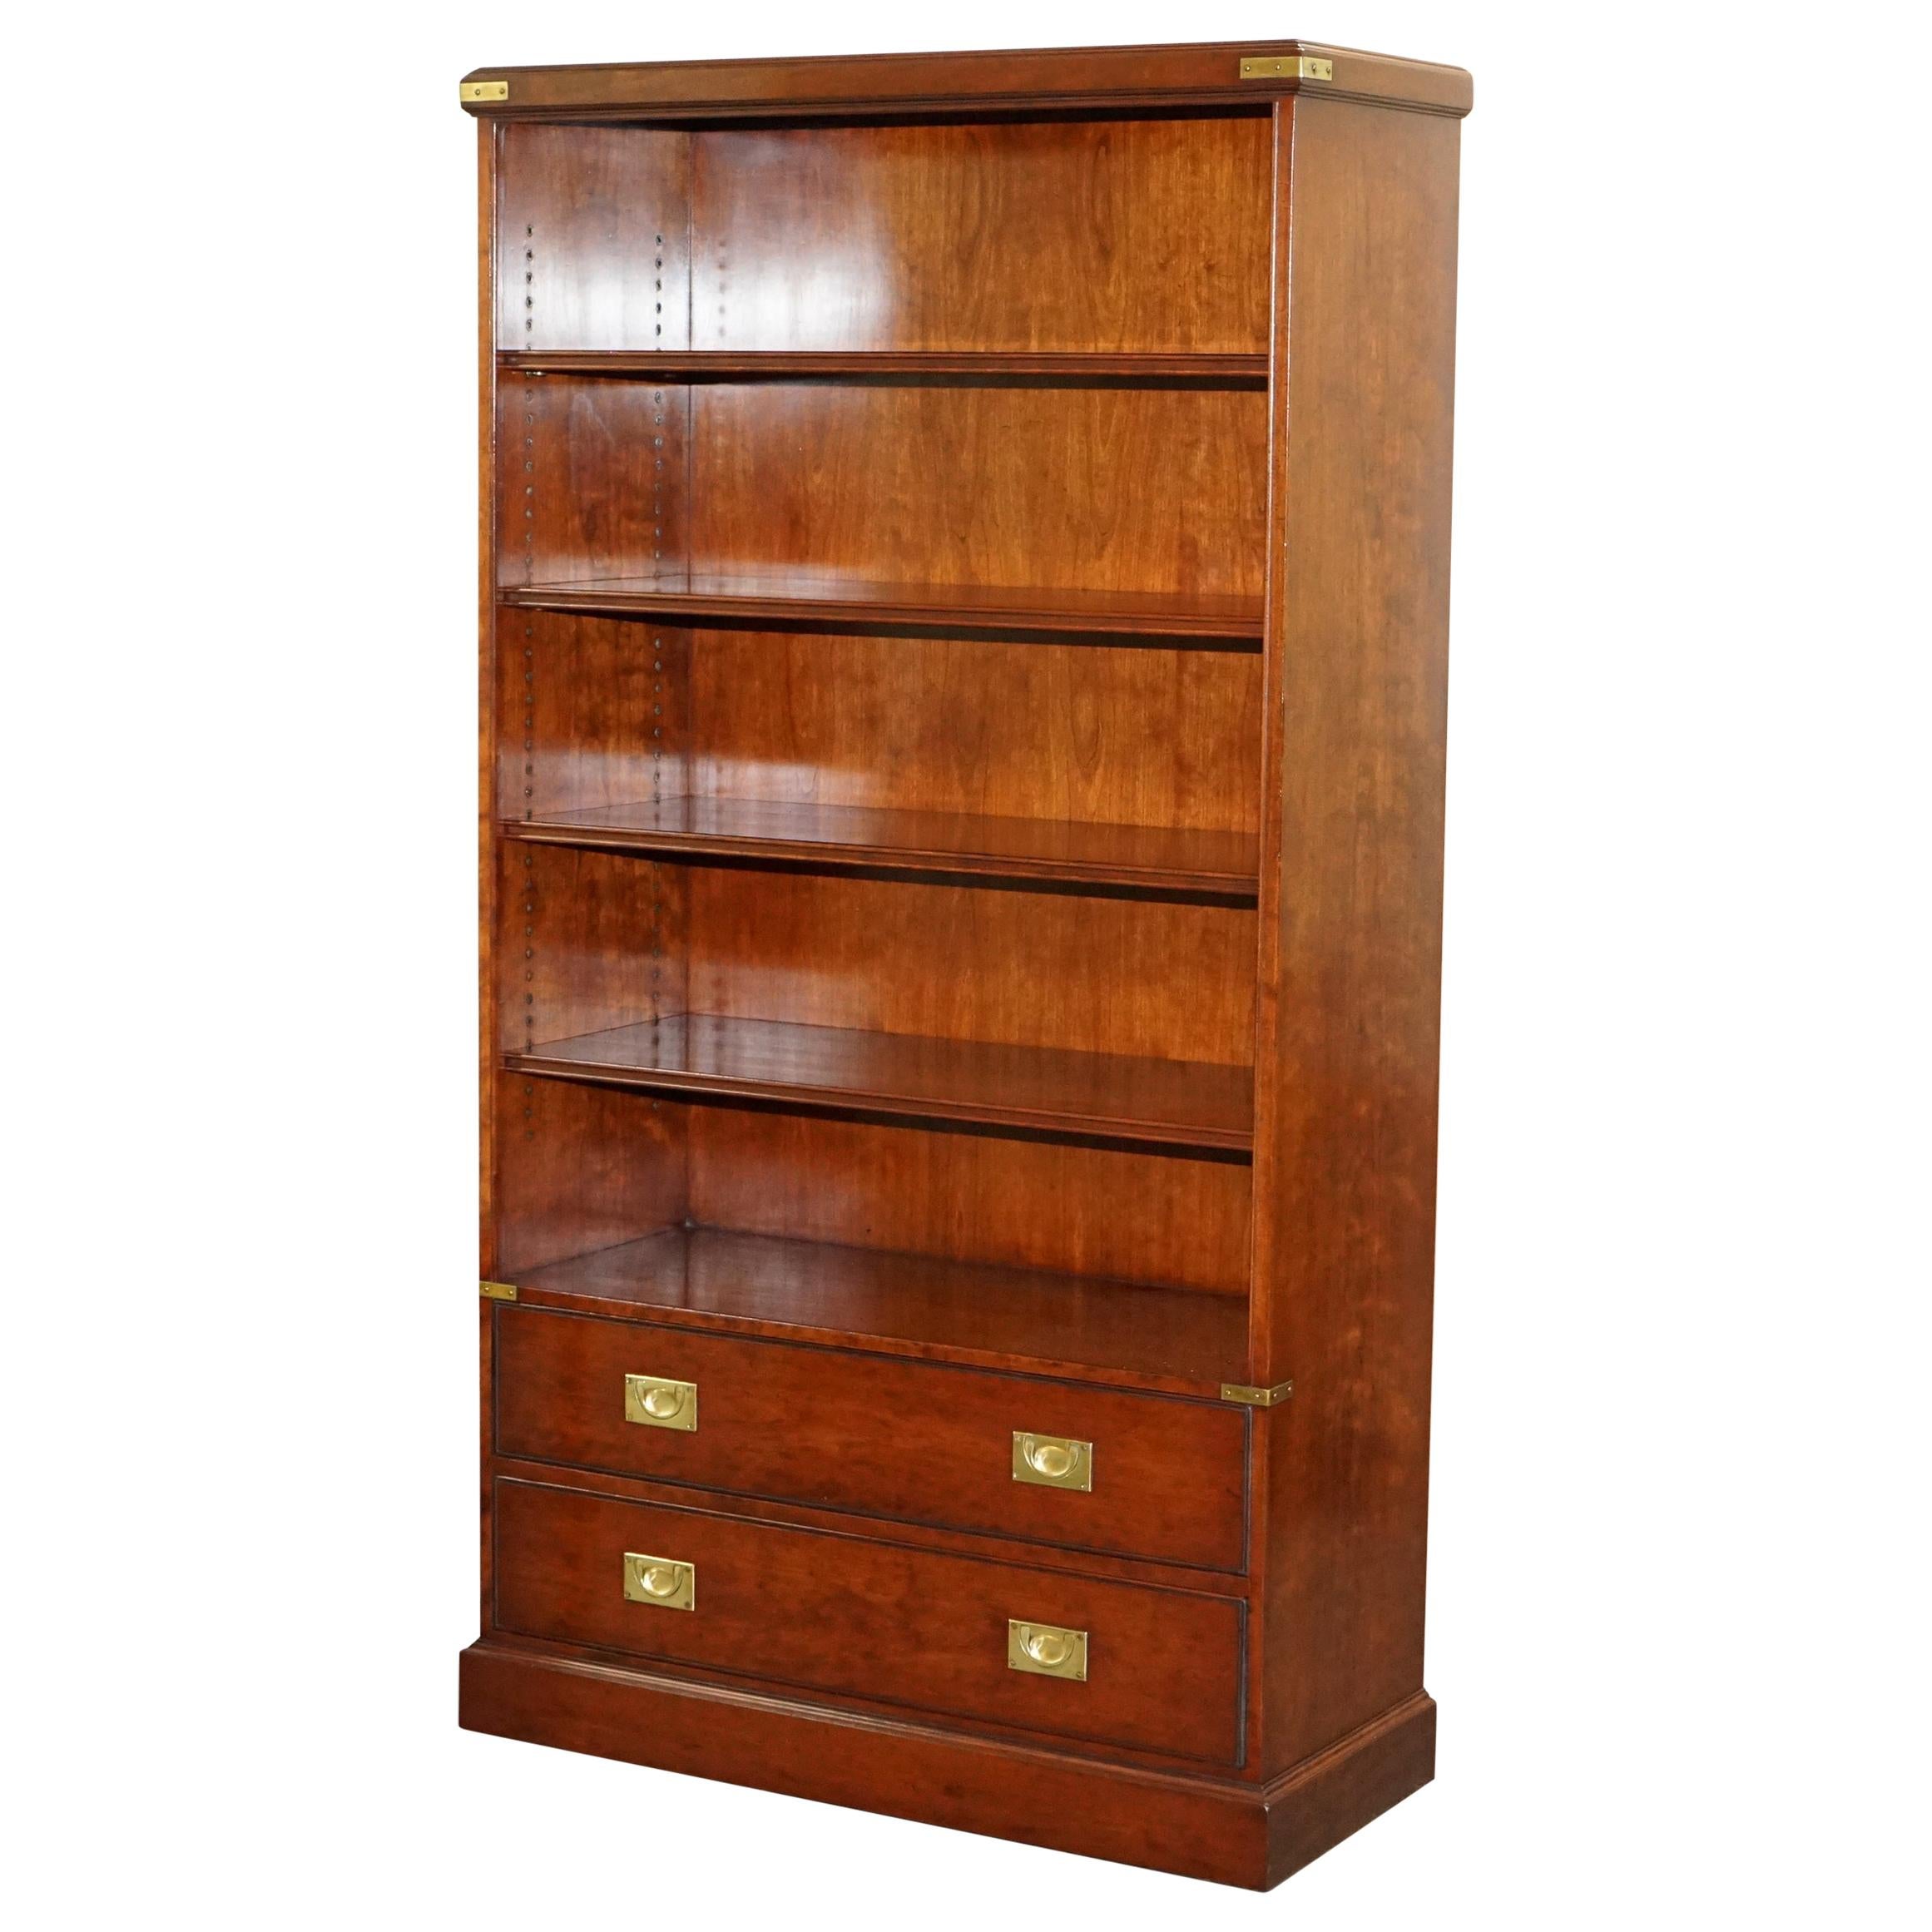 Stunning Kennedy Furniture Harrods Military Campaign Mahogany Bookcase Drawers